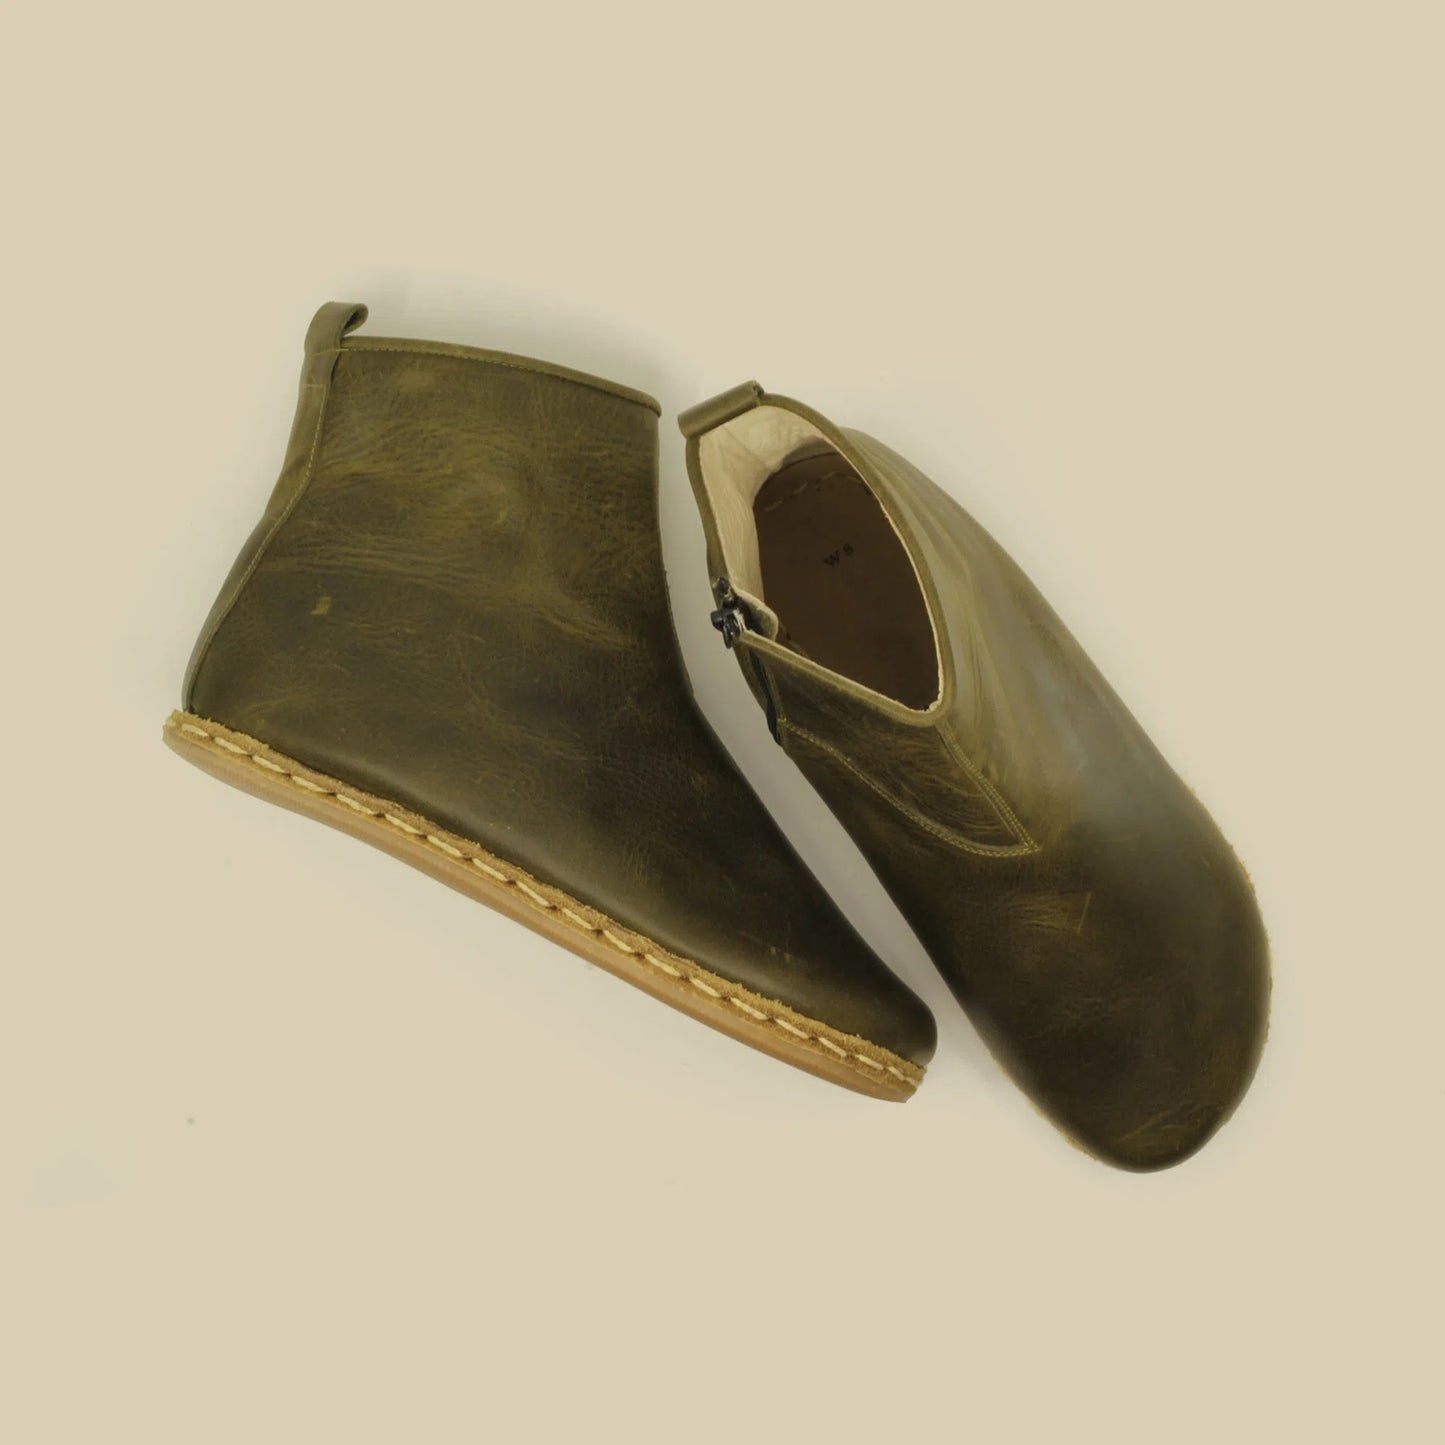 Genuine Leather Barefoot Men's Boots Olive Green Zippered Short Boots-Short Boots-nefesshoes-5-Nefes Shoes